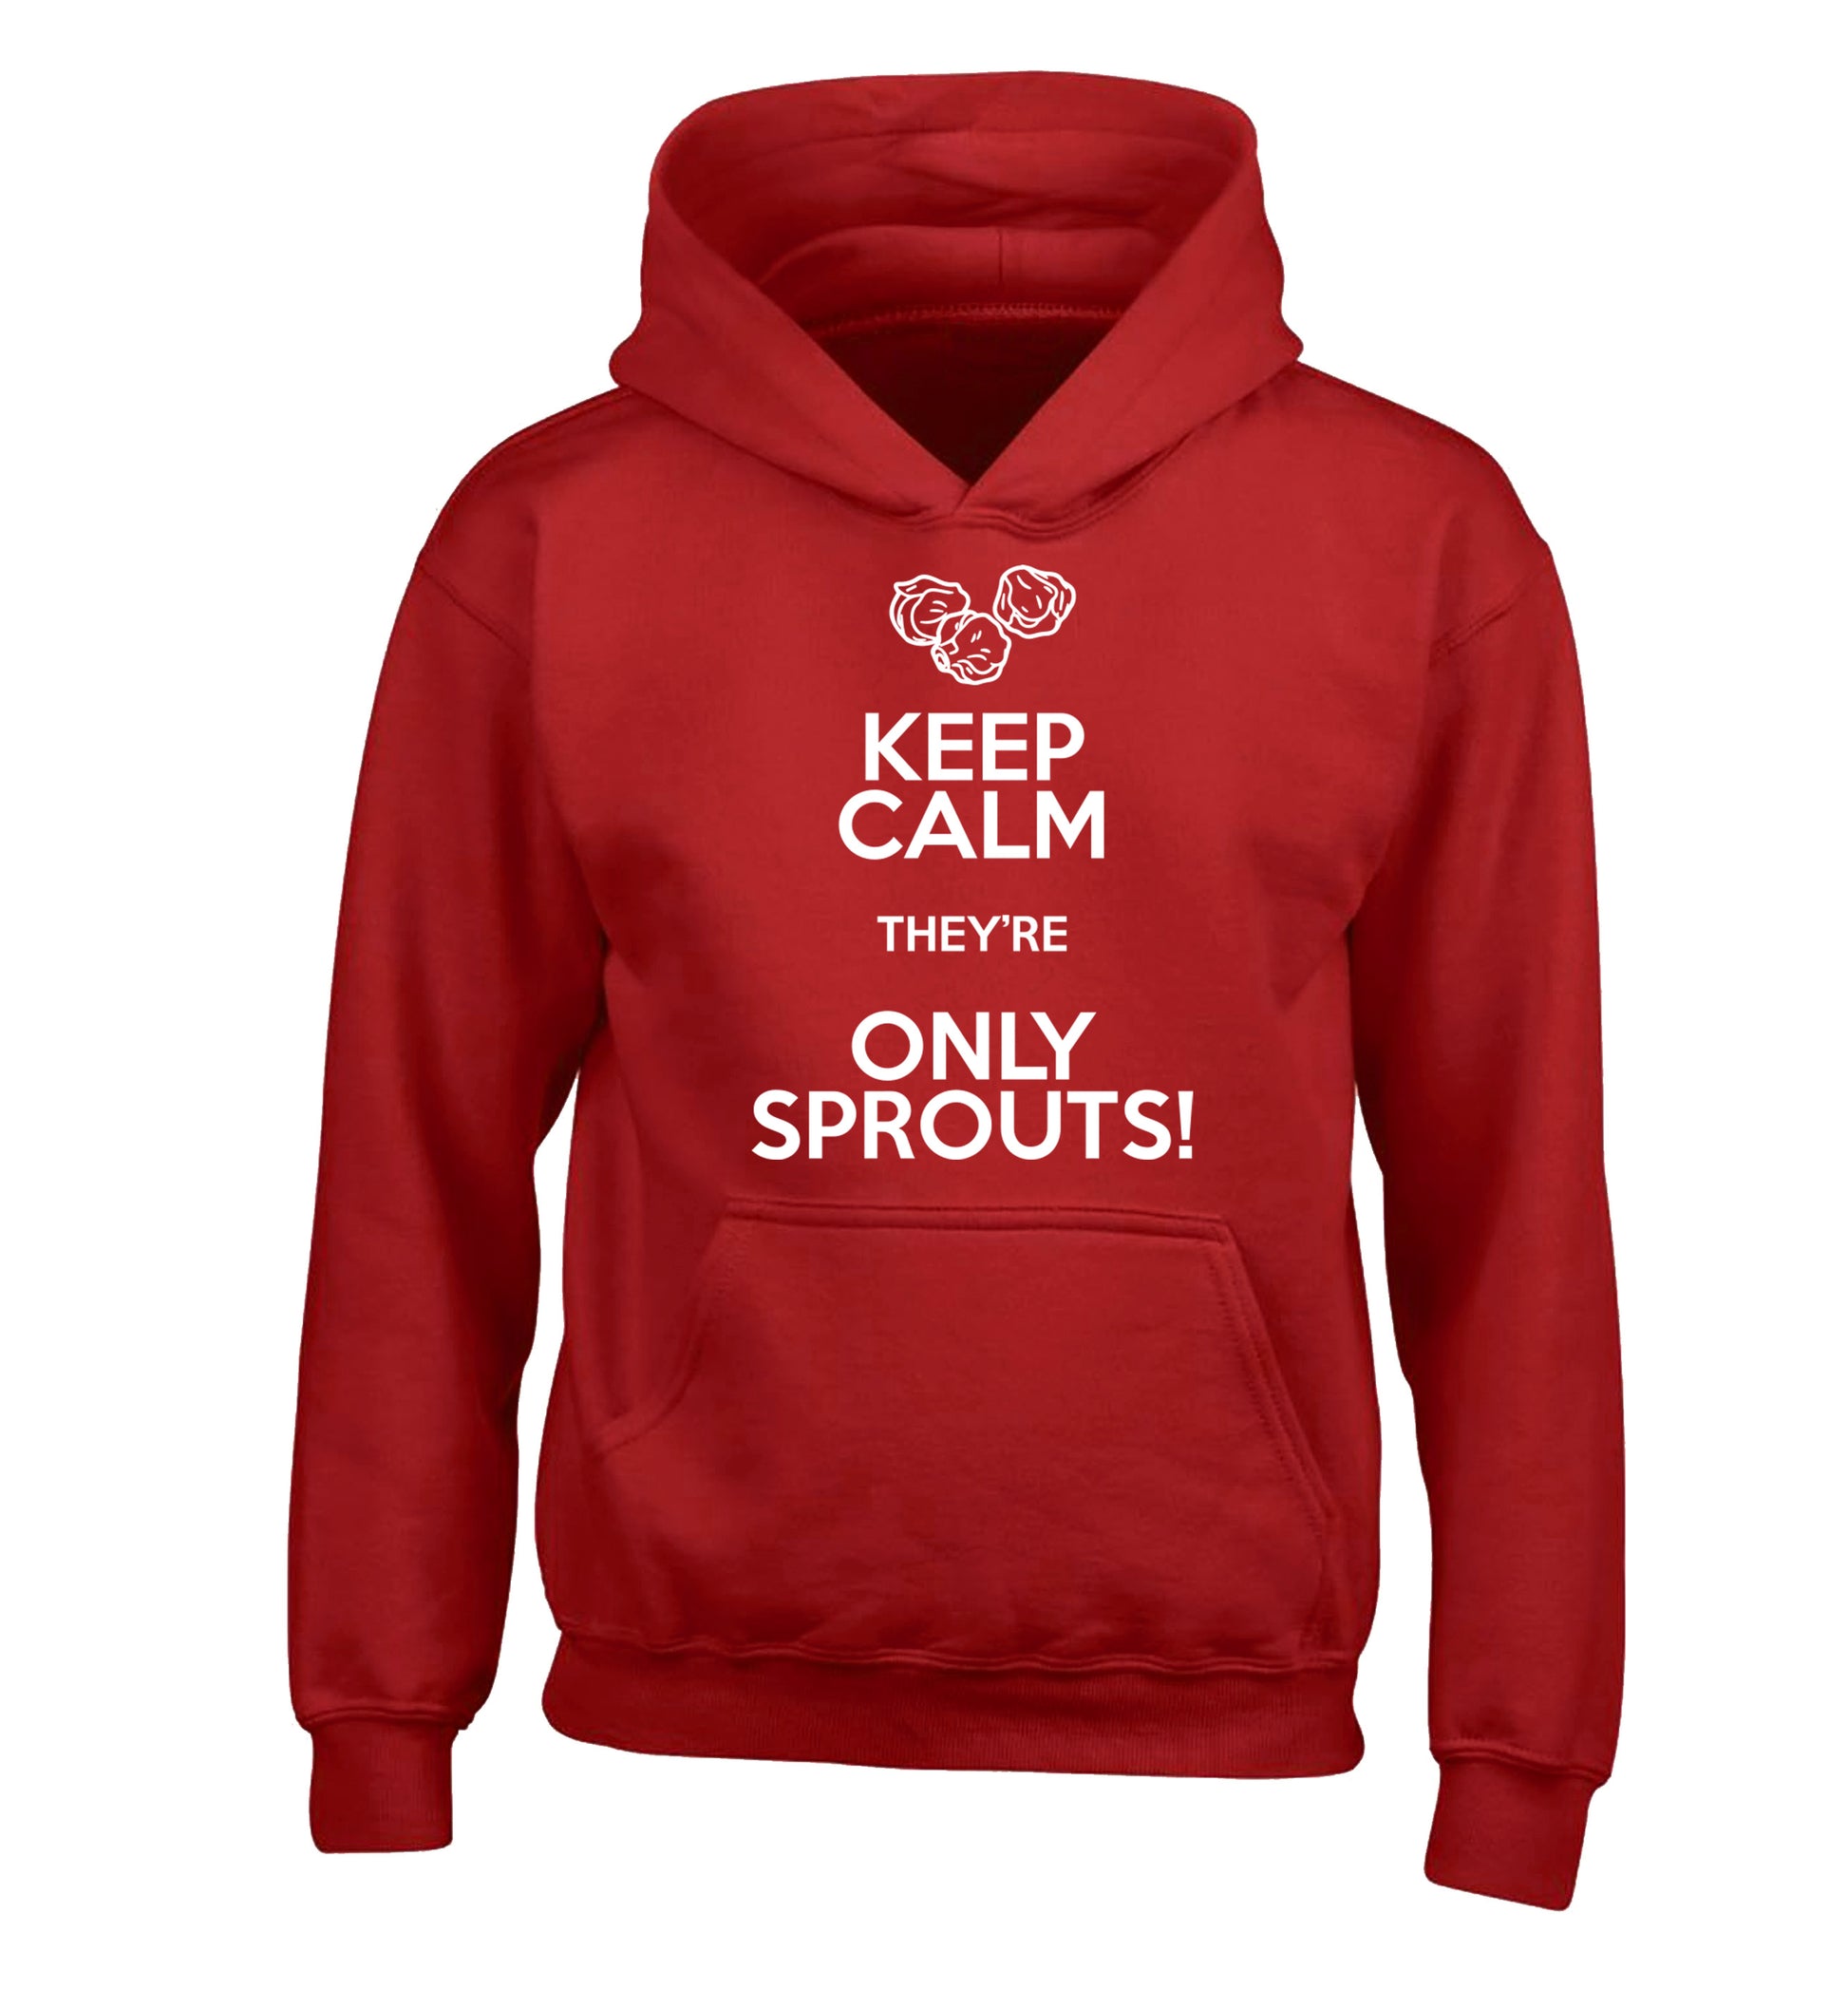 Keep calm they're only sprouts children's red hoodie 12-13 Years